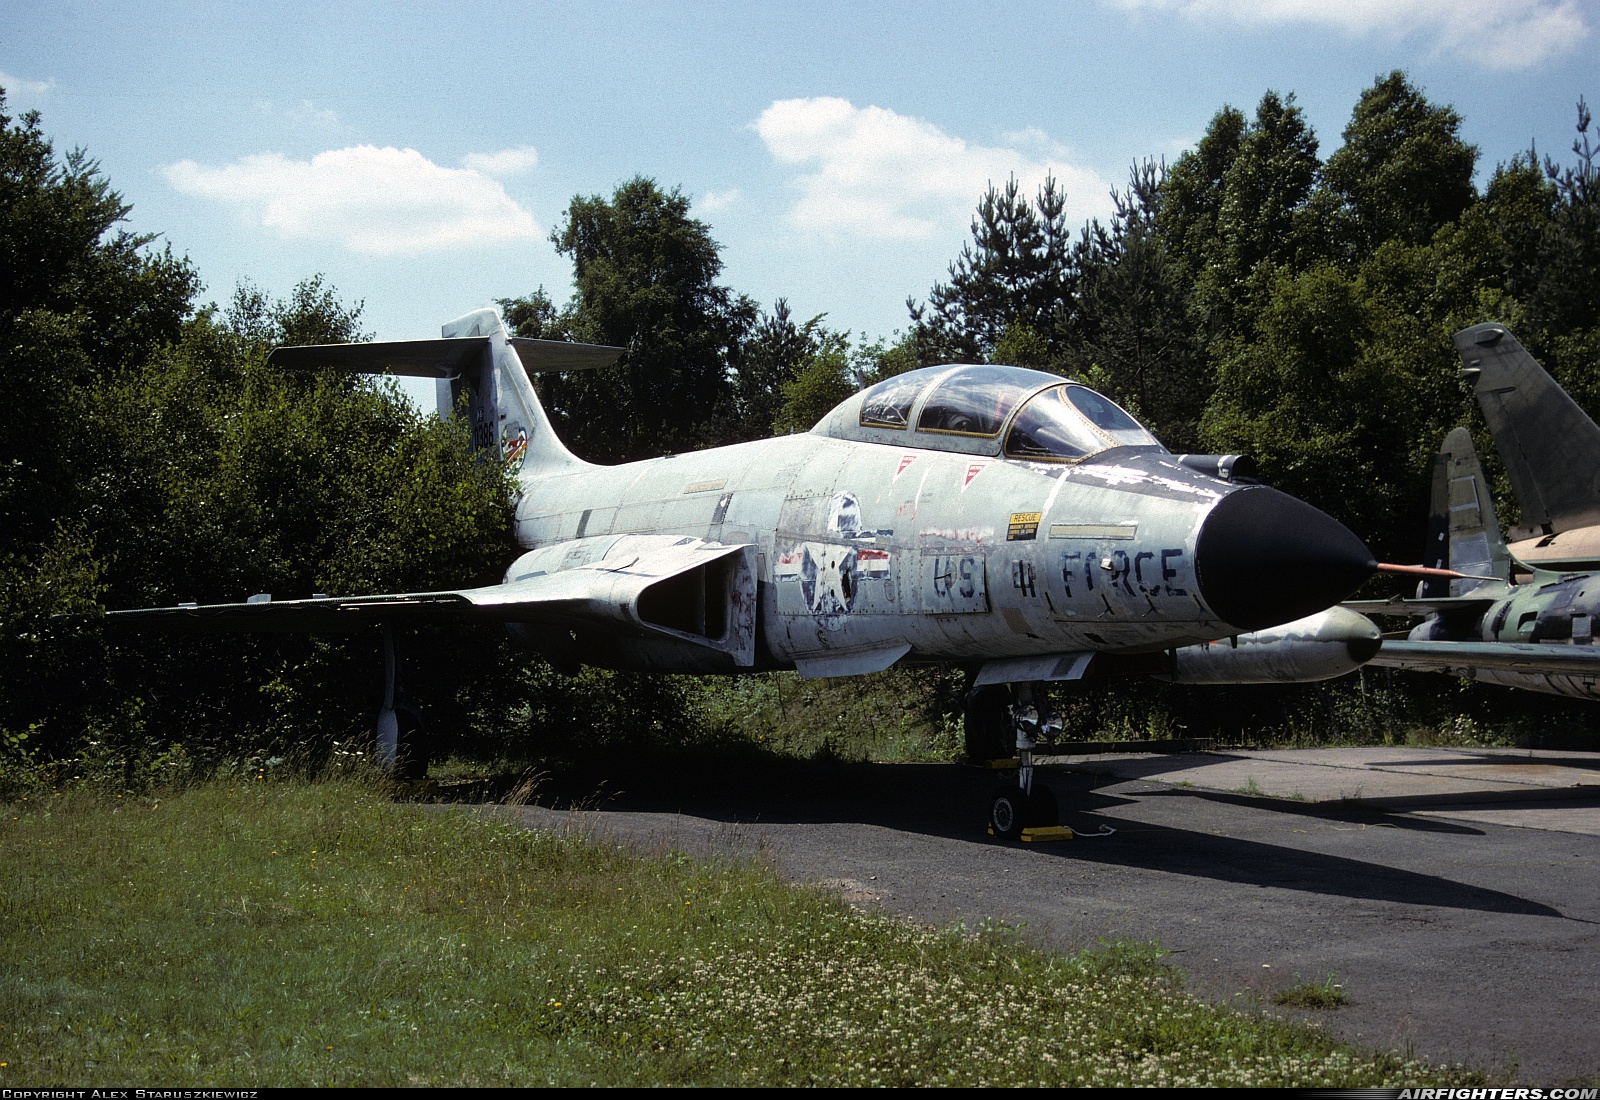 USA - Air Force McDonnell F-101F Voodoo 57-0386 at Ramstein (- Landstuhl) (RMS / ETAR), Germany